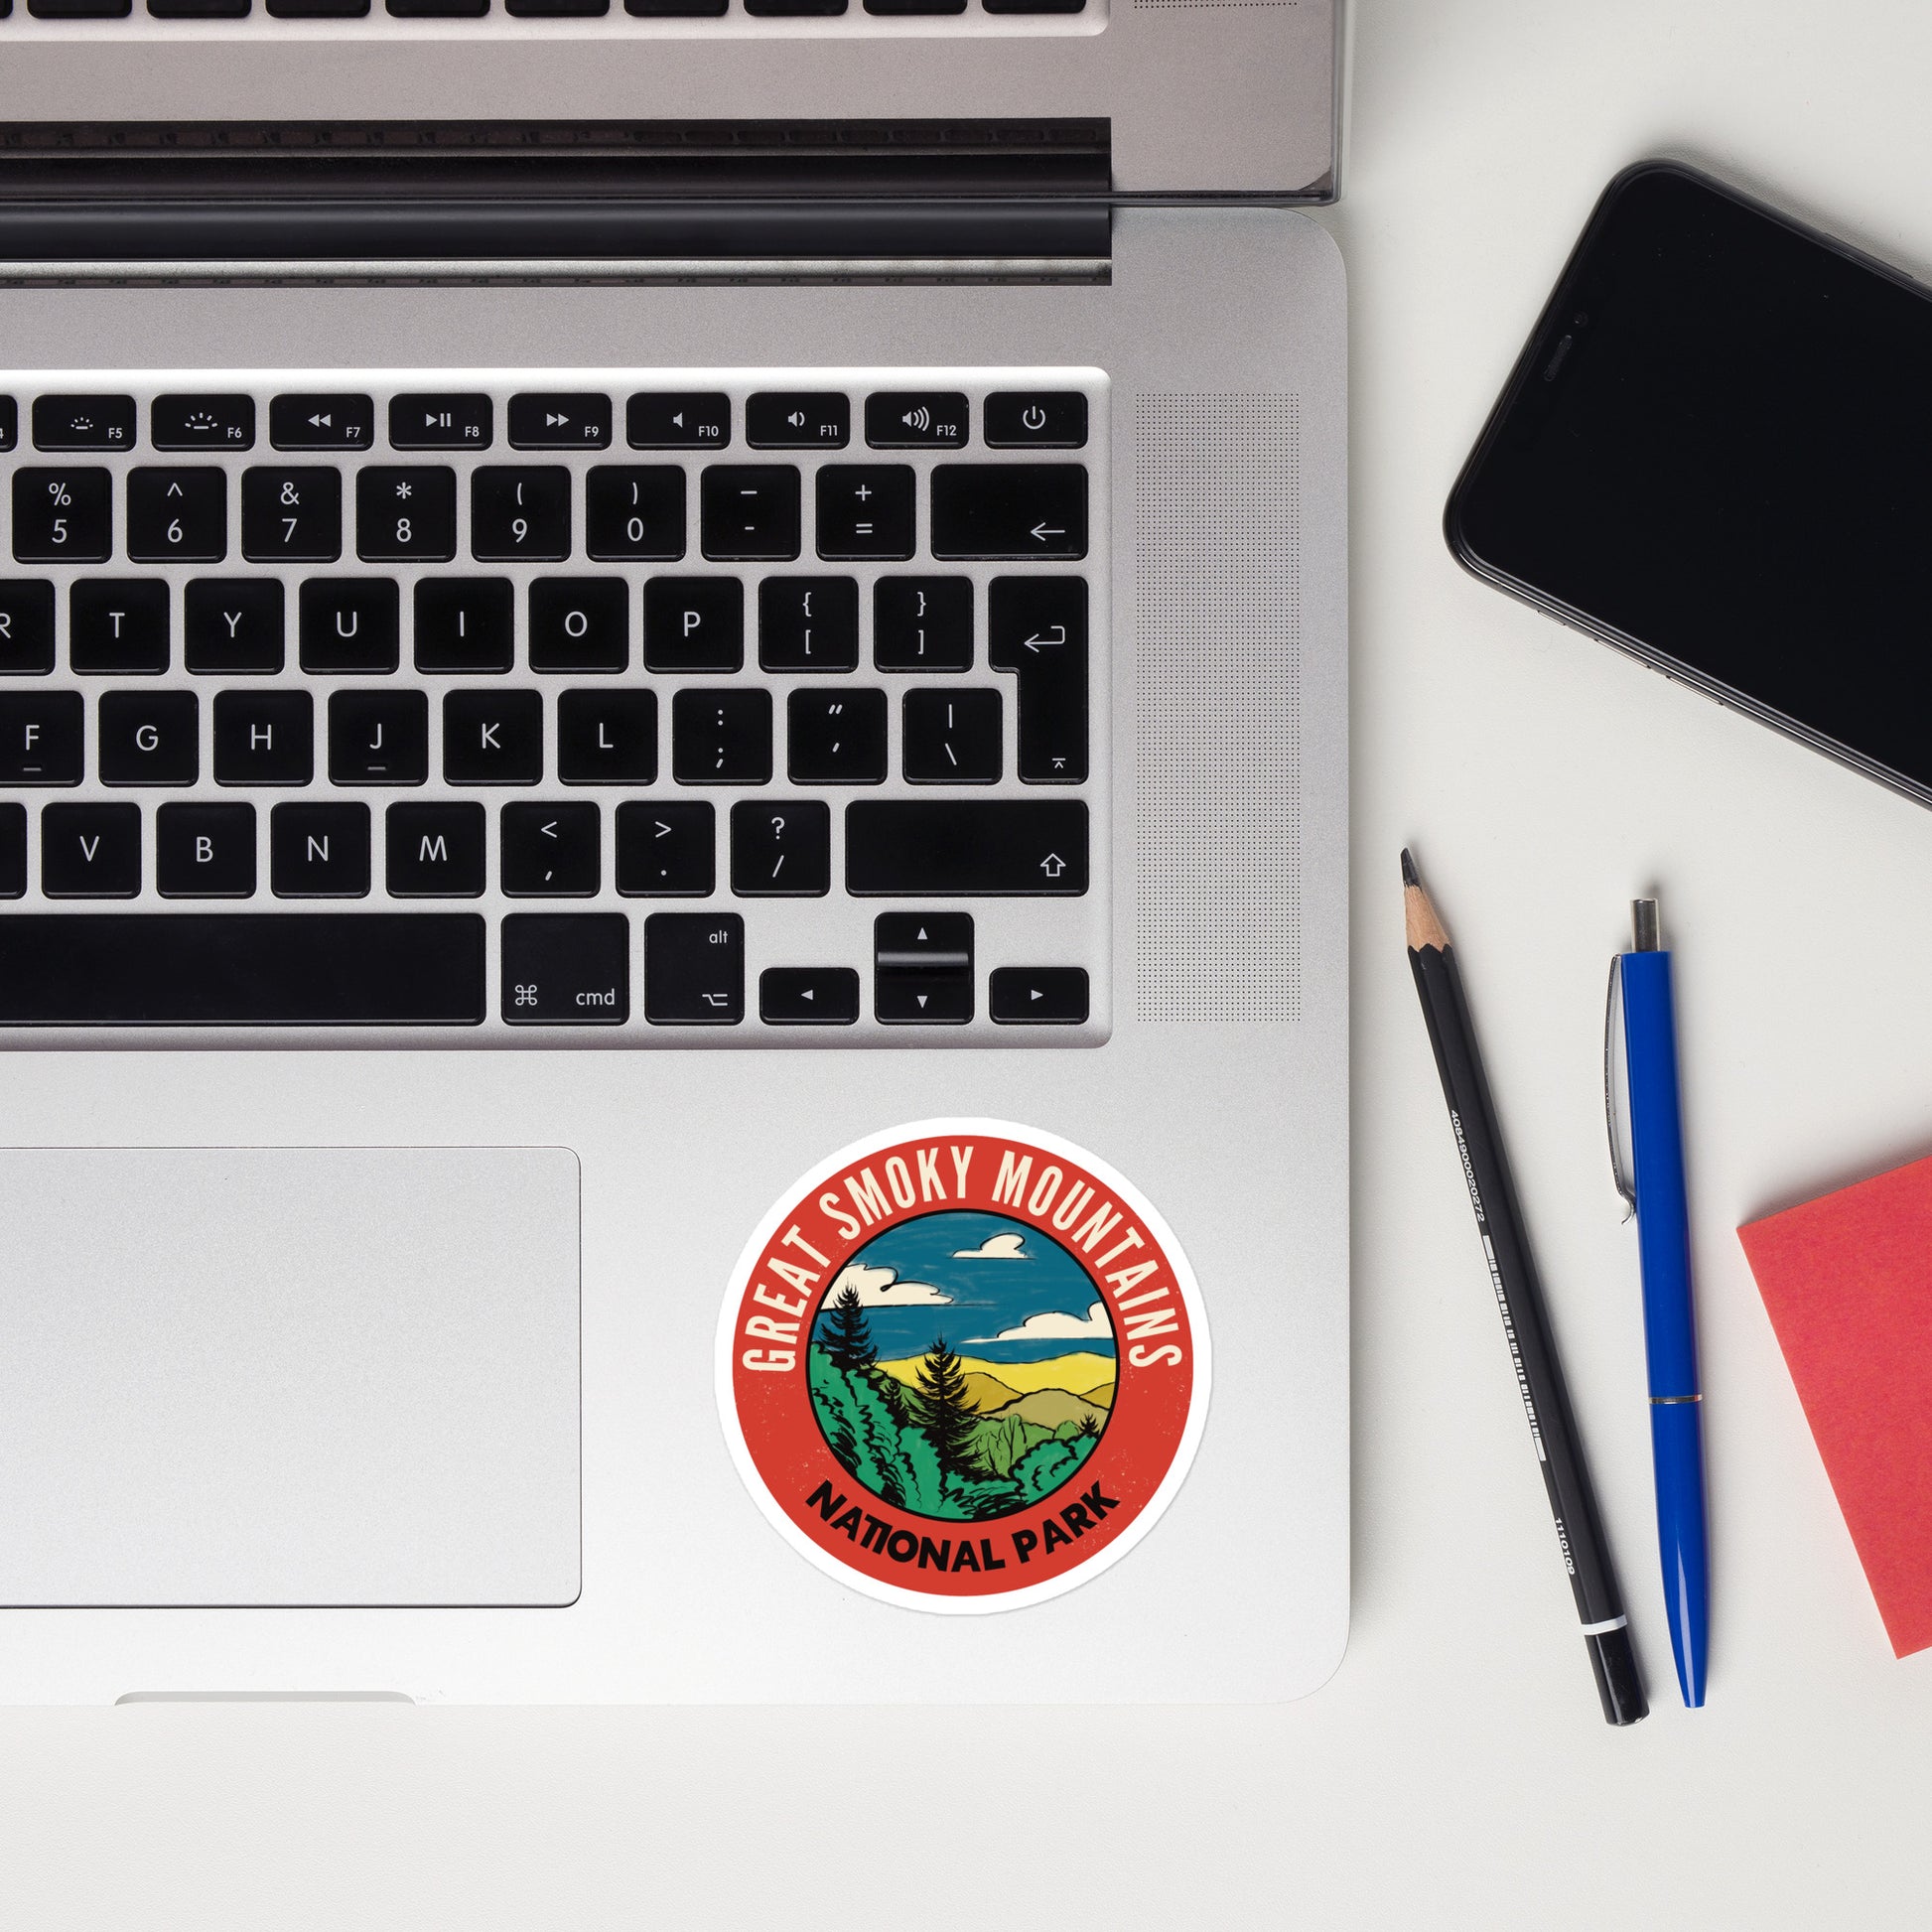 A sticker of Great Smoky Mountains National Park on a laptop